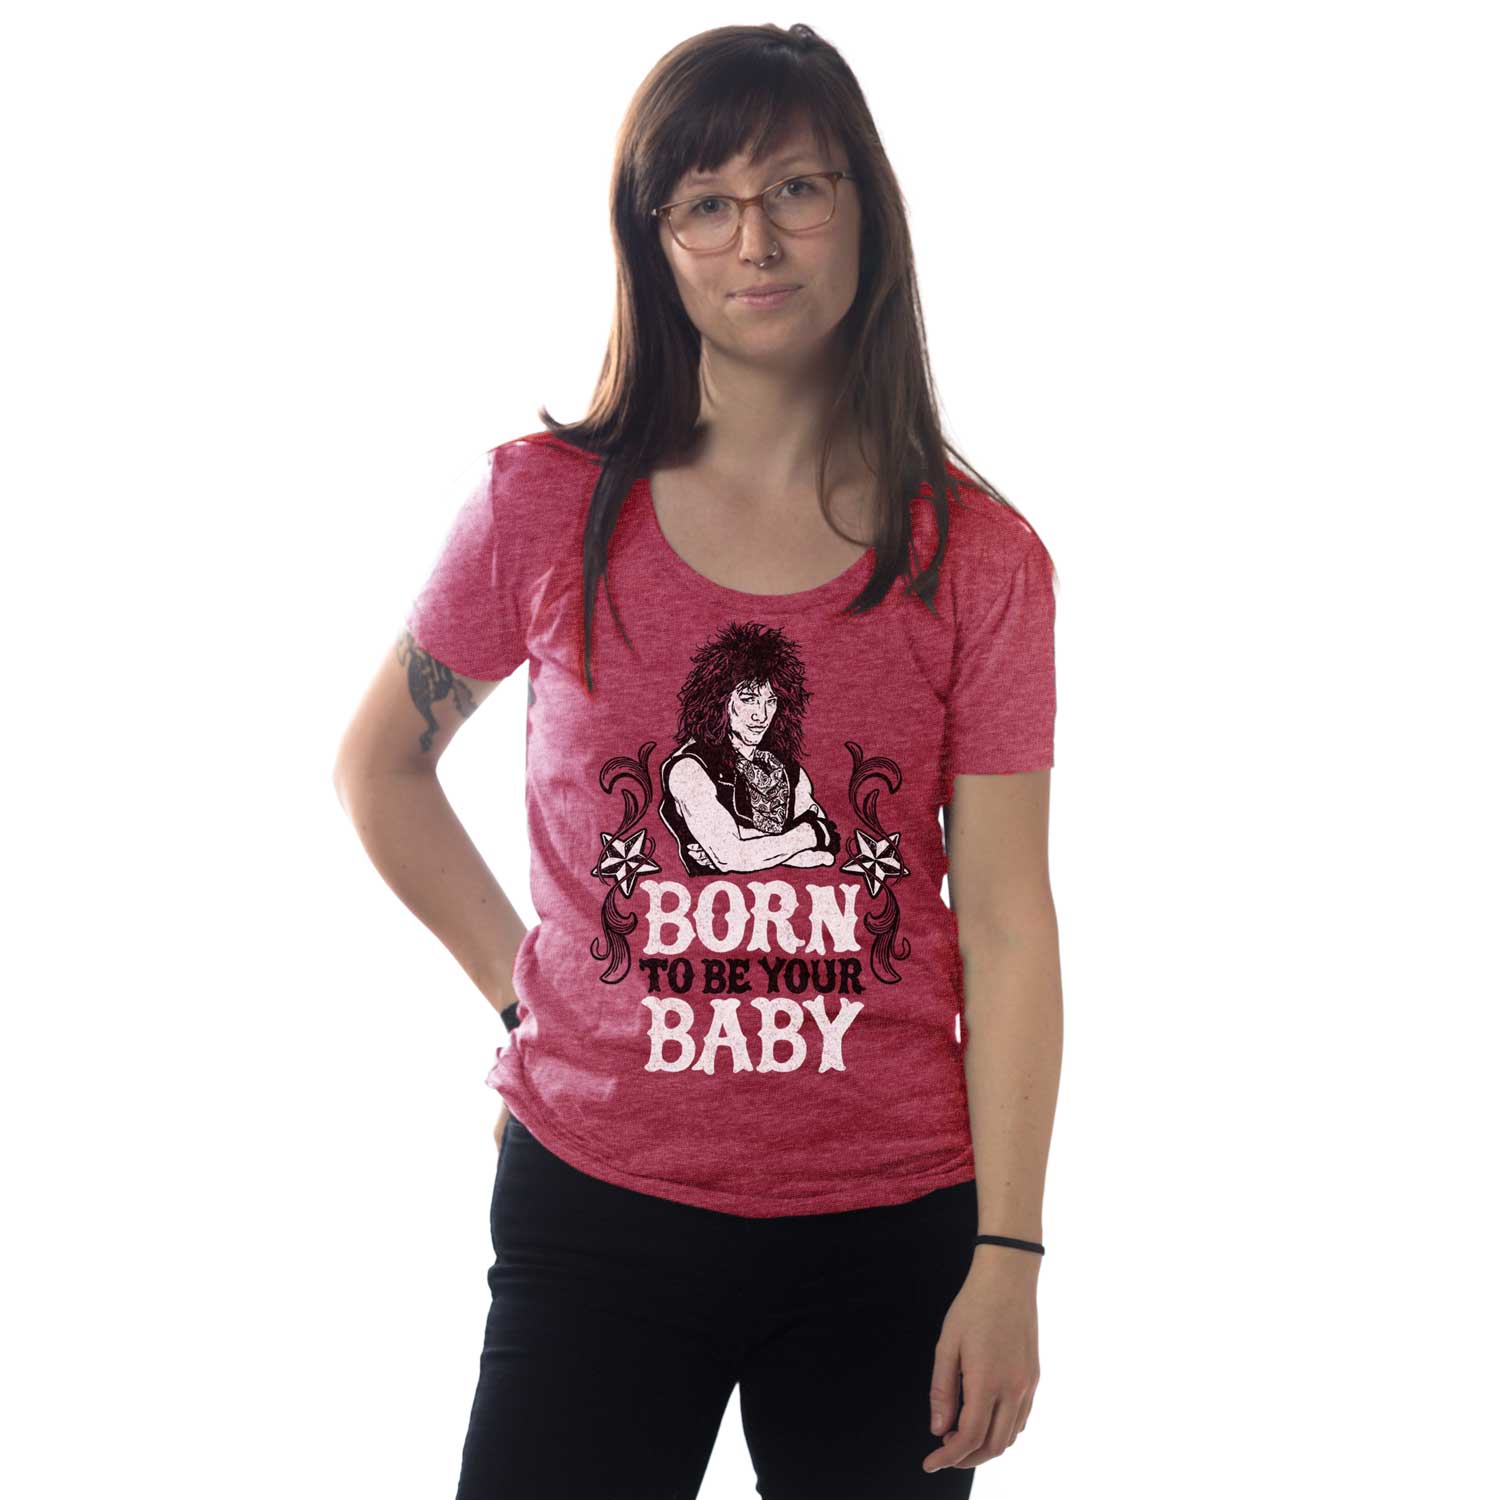 Women's Born To Be Your Baby Vintage Graphic Tee | Cool Bon Jovi T-shirt for Women | Solid Threads